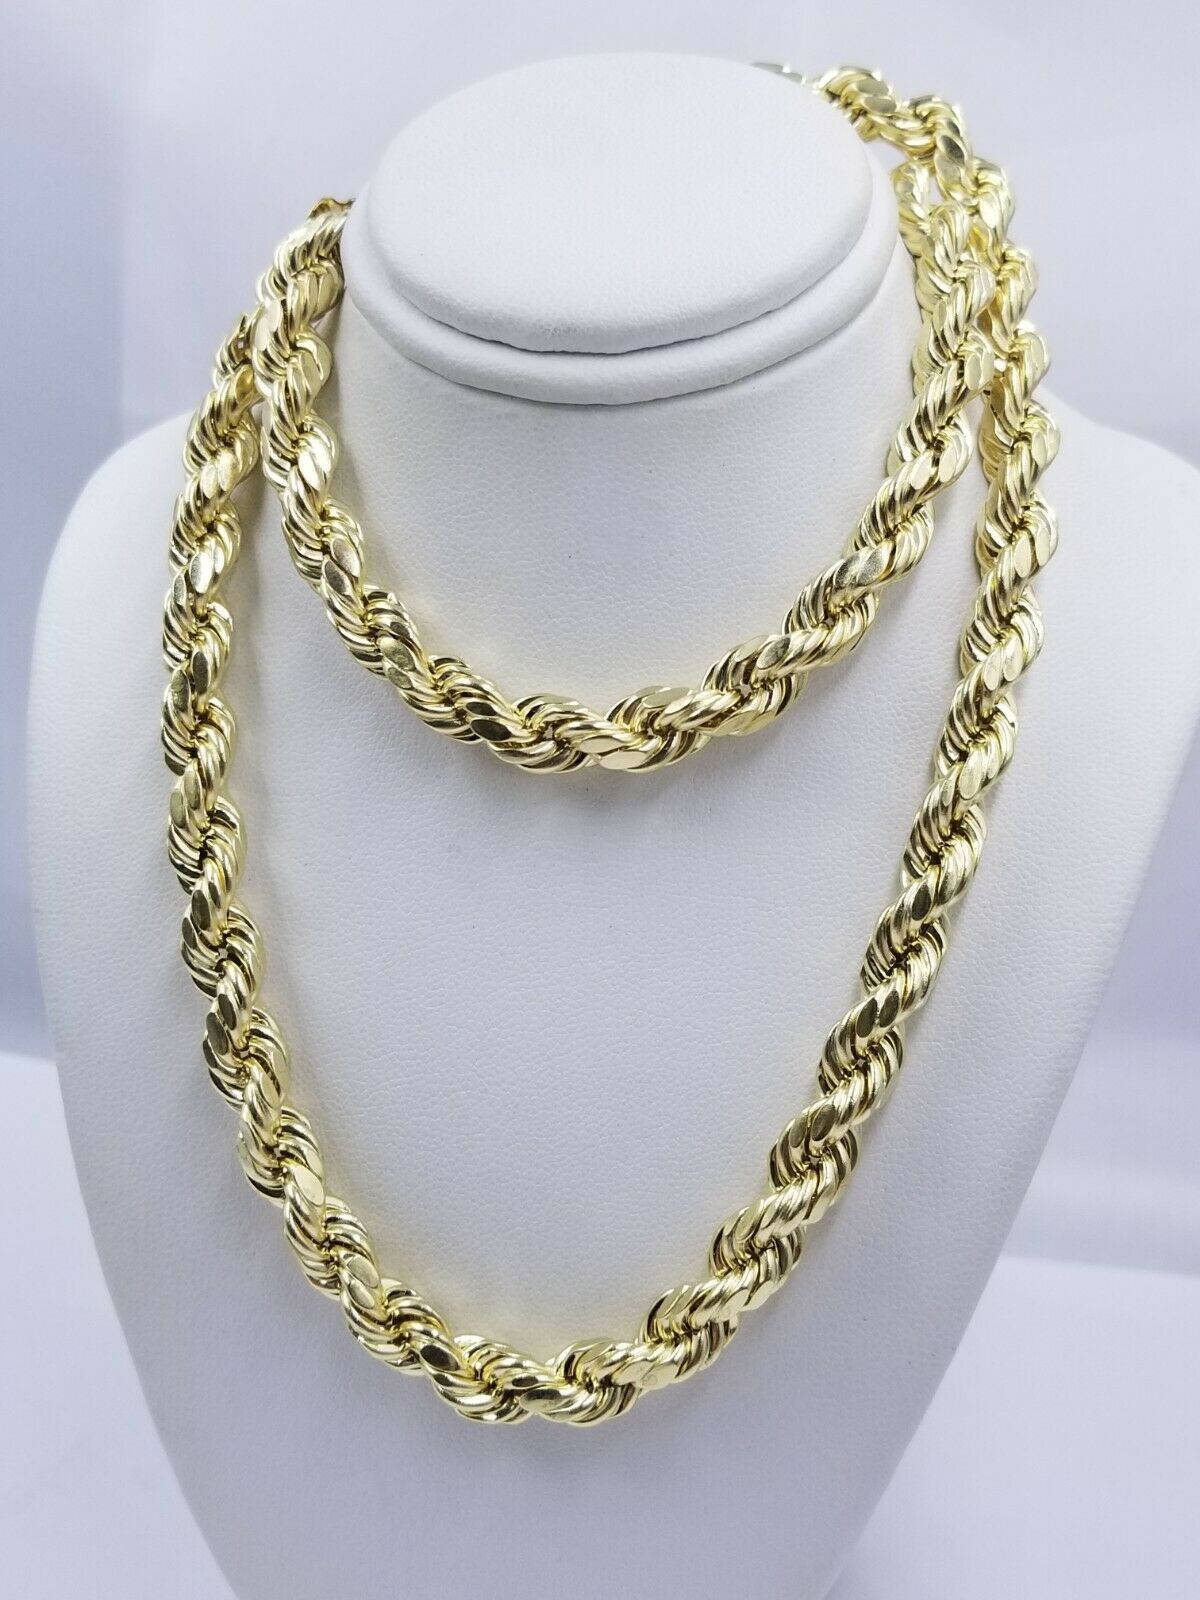 Solid 10k Yellow Gold Rope Chain Pendant Necklace 4mm-10mm Diamond Cut 18